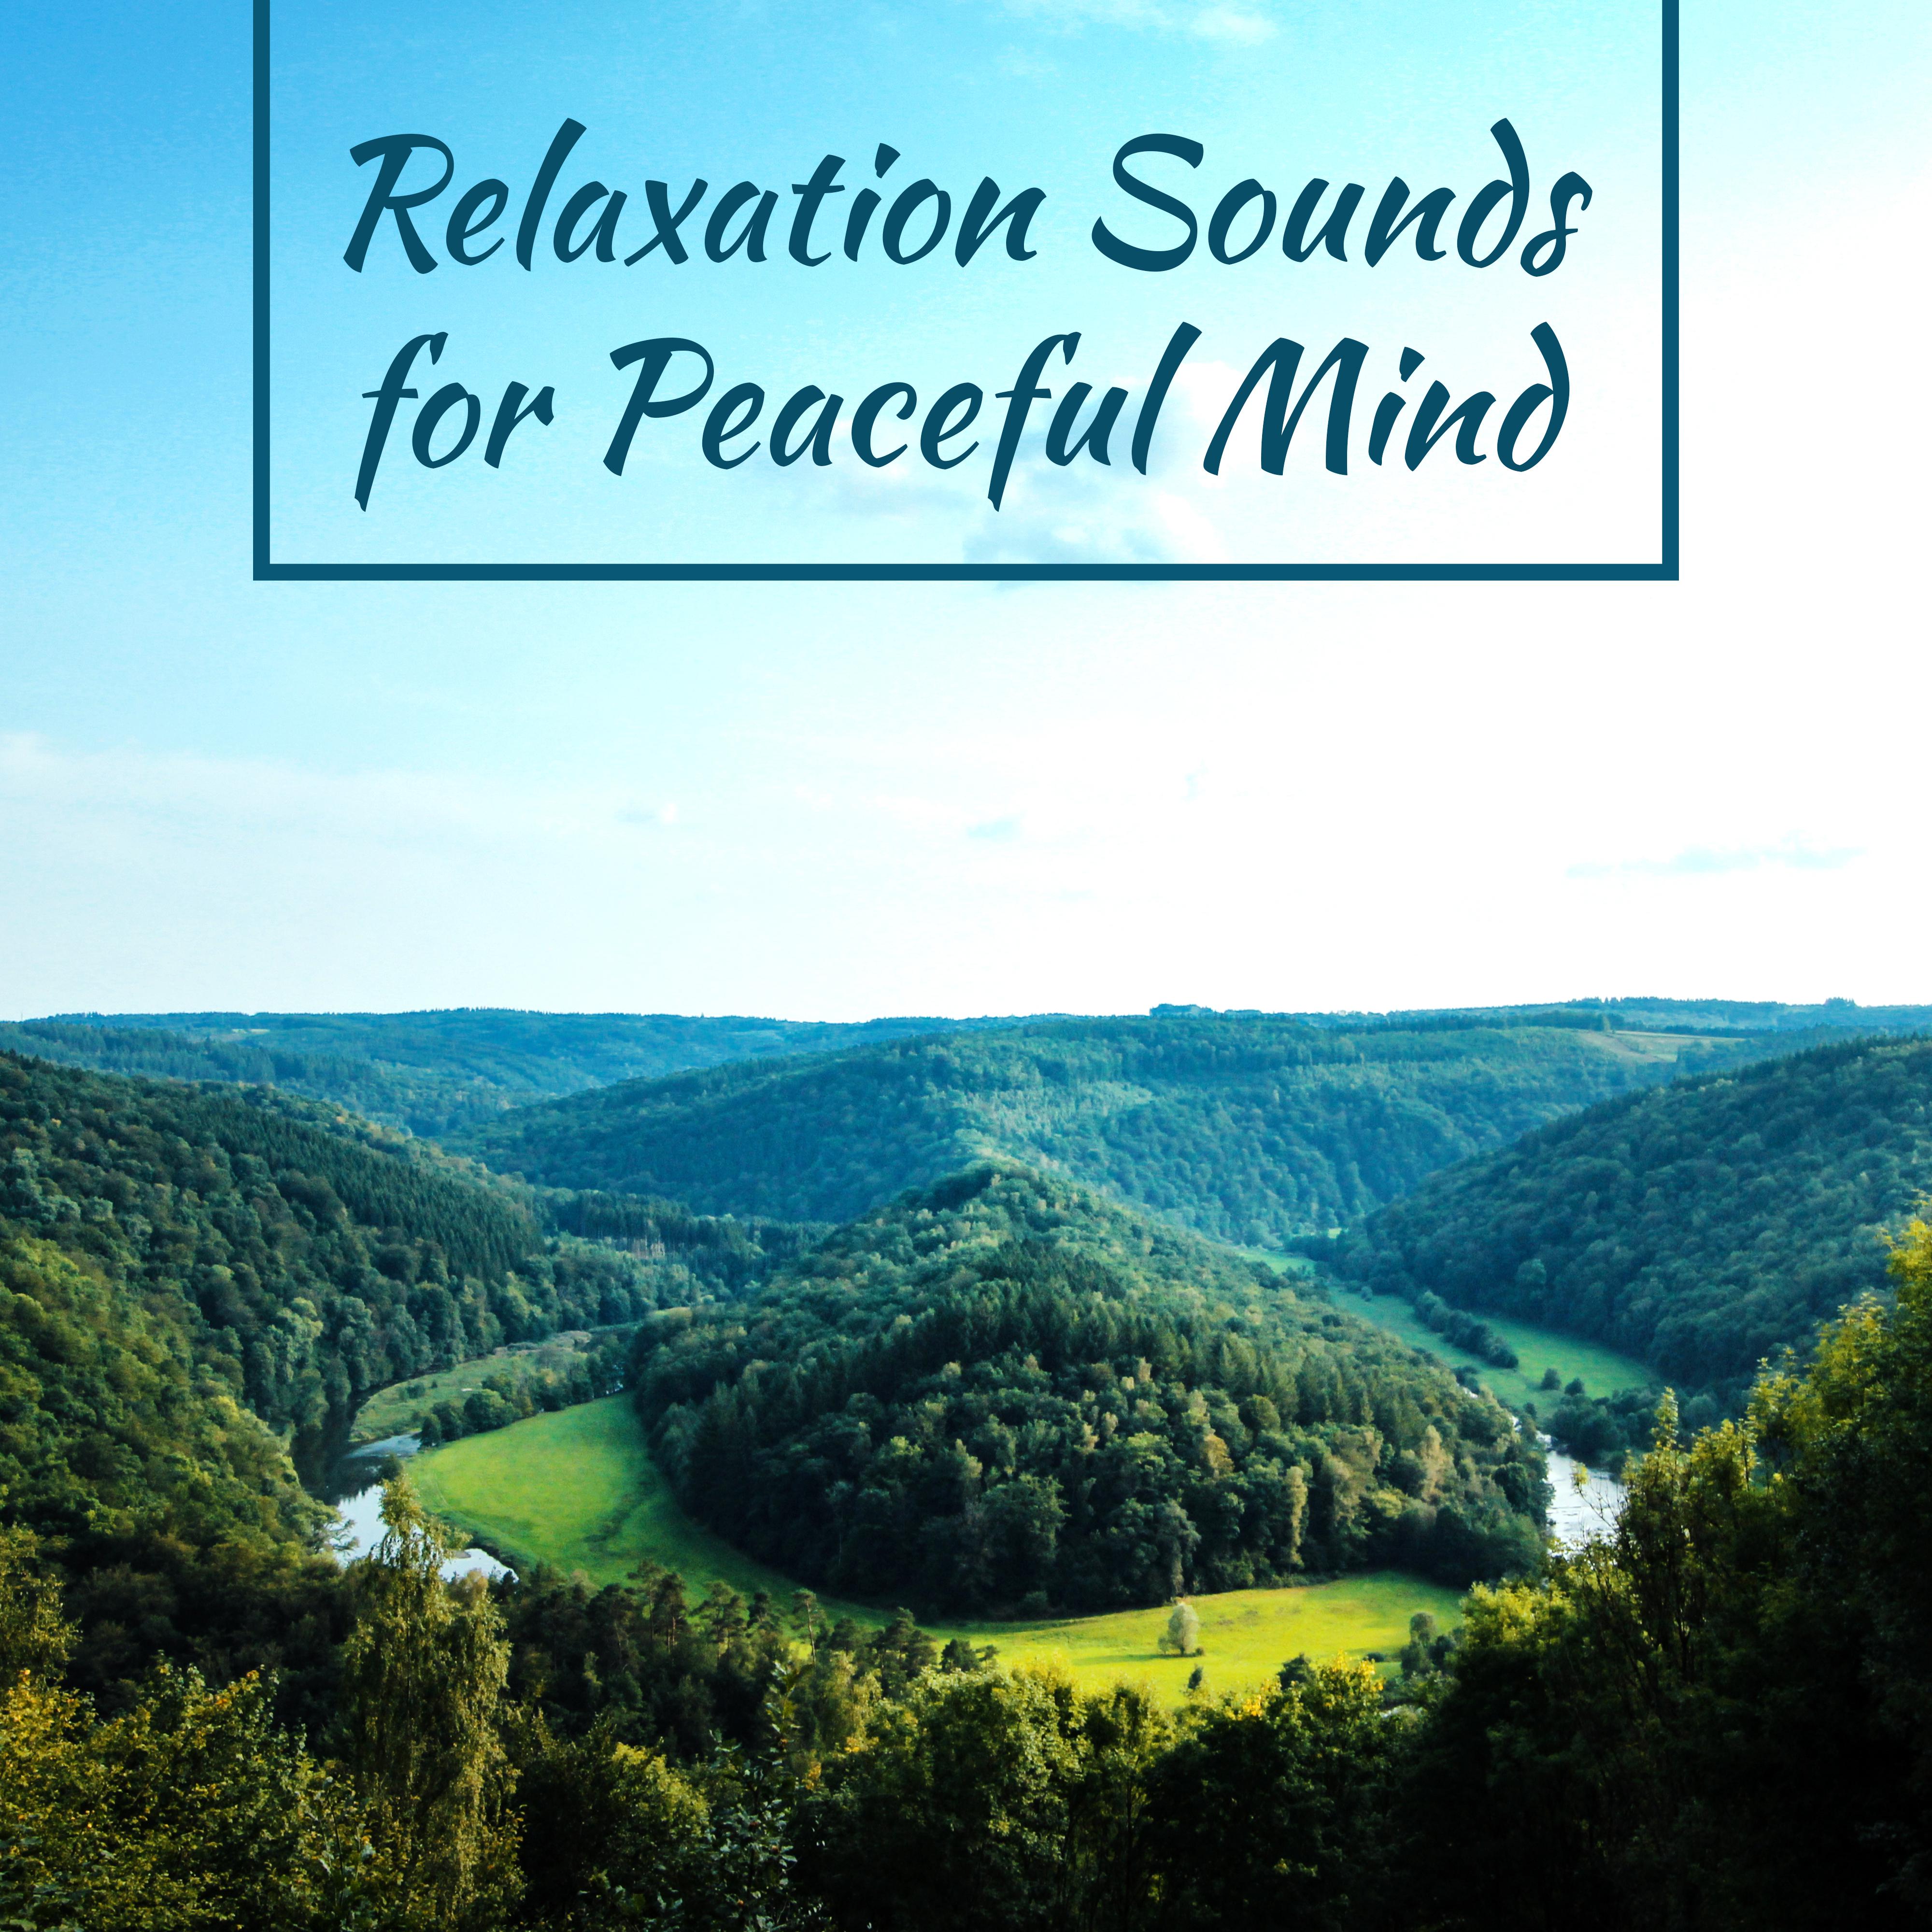 Relaxation Sounds for Peaceful Mind